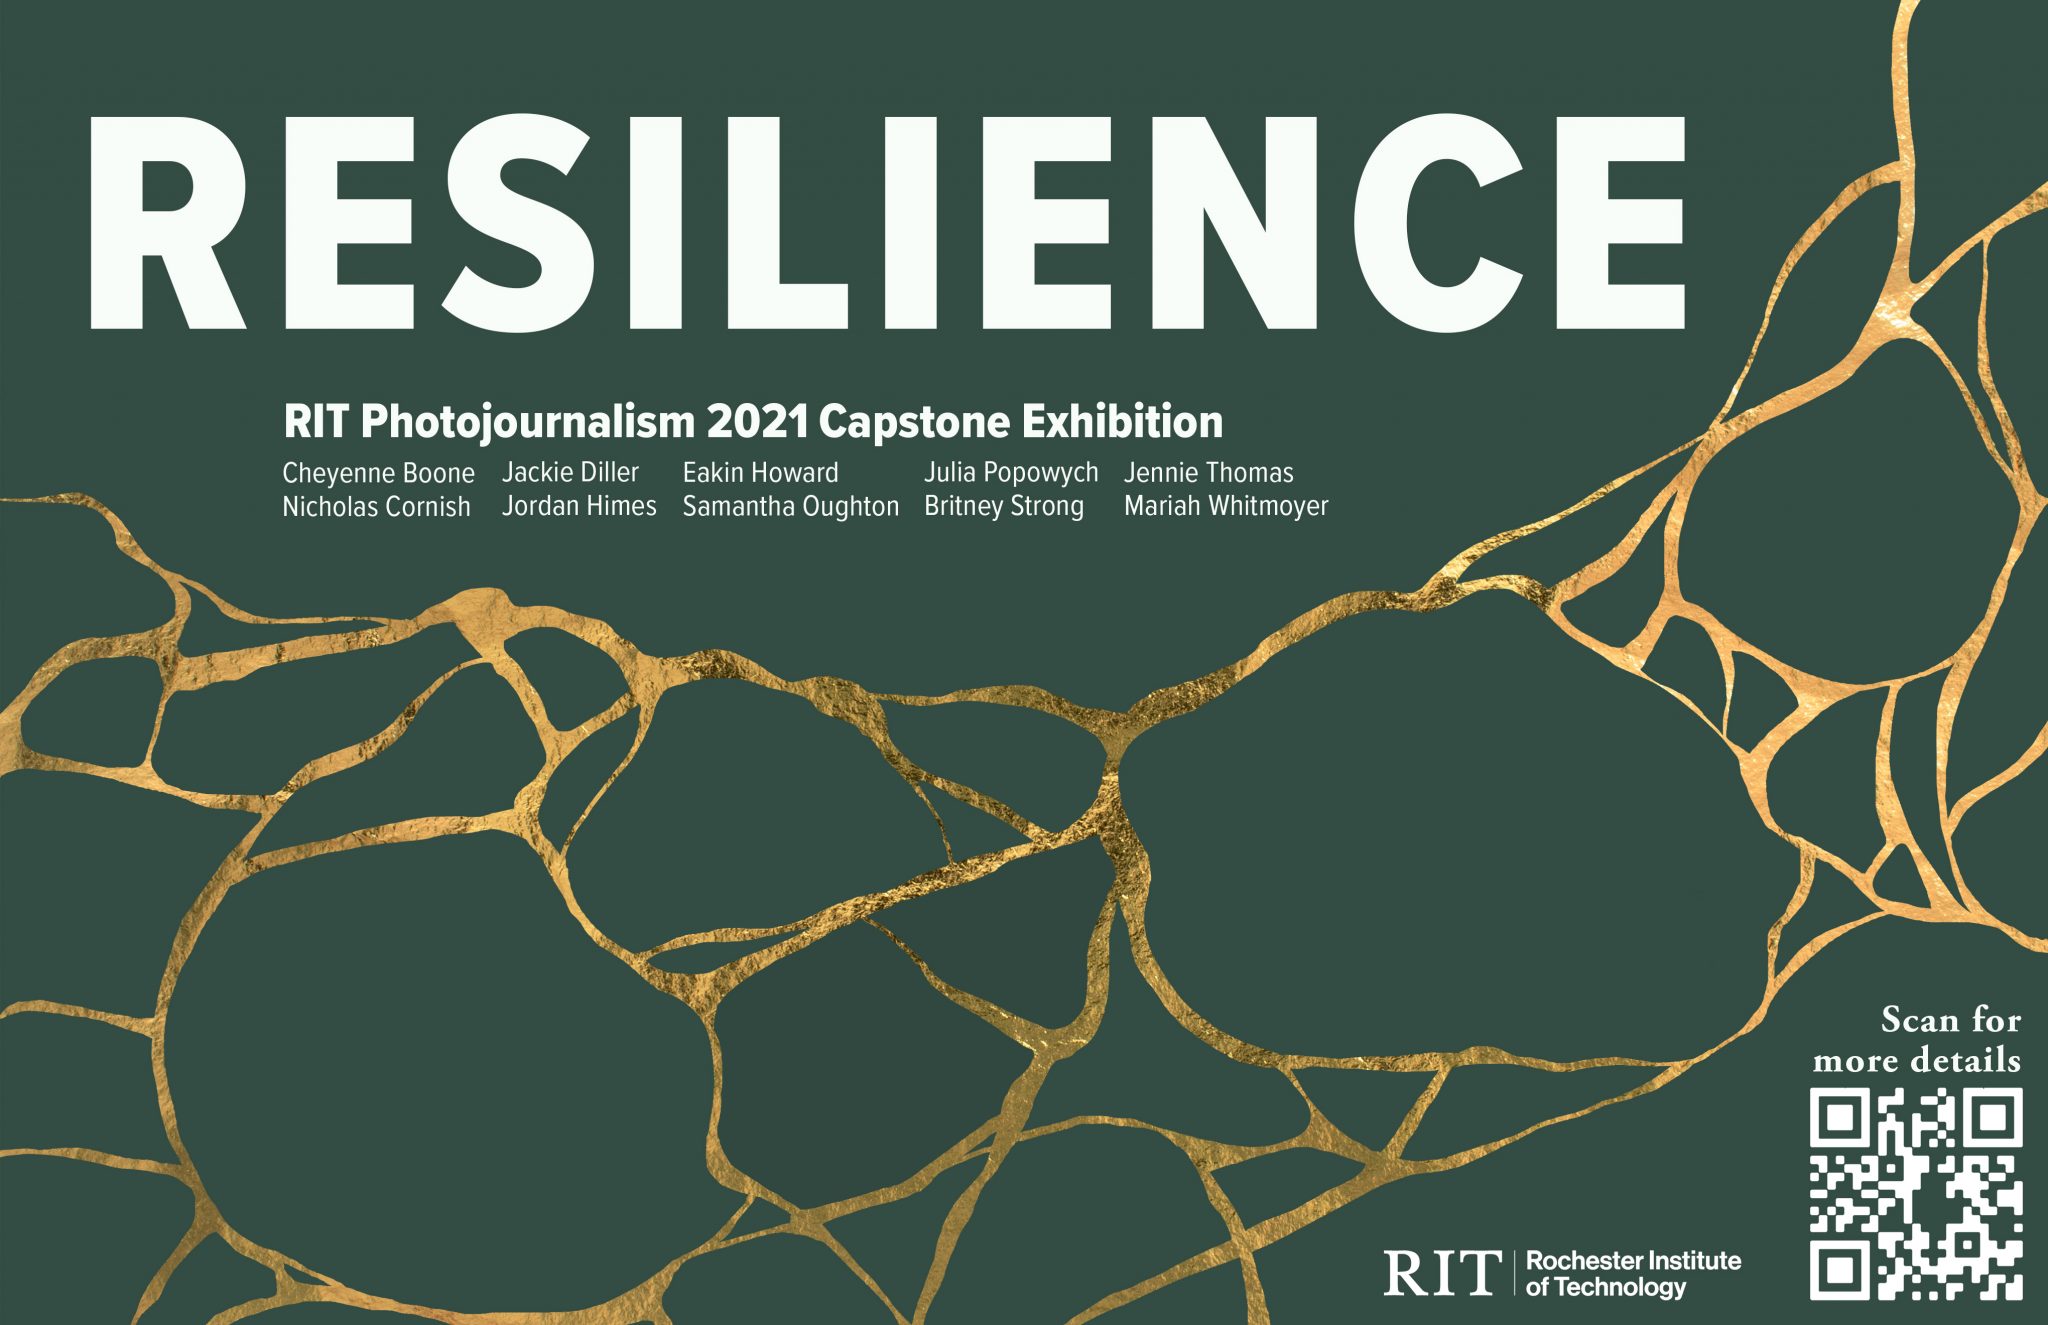 Image: Green poster with "Resilience" in white font